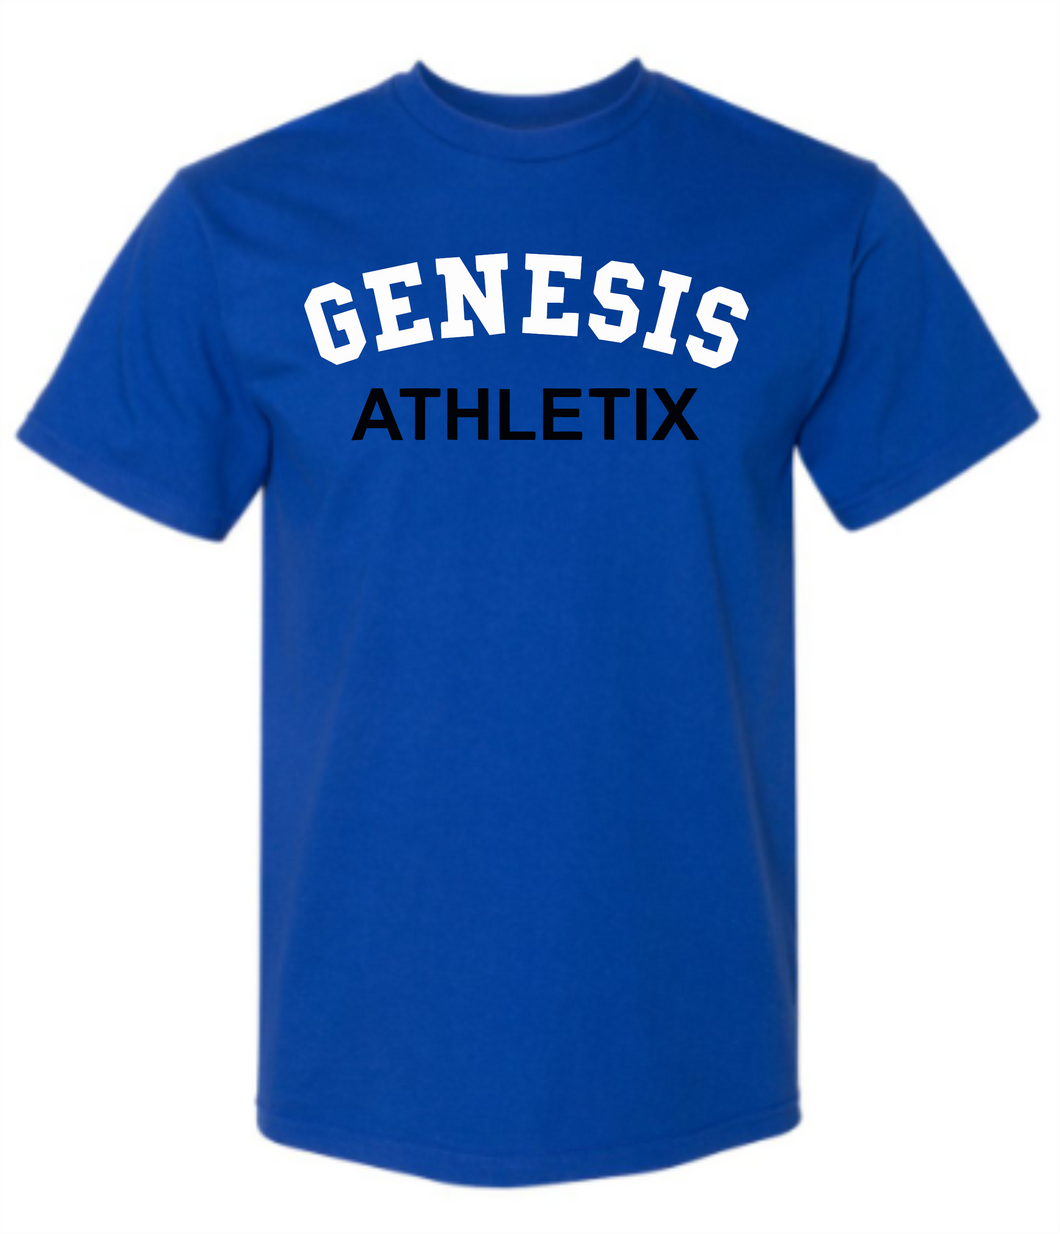 Genesis Athletix Collegiate Style Adult - Youth - Toddler T-Shirt